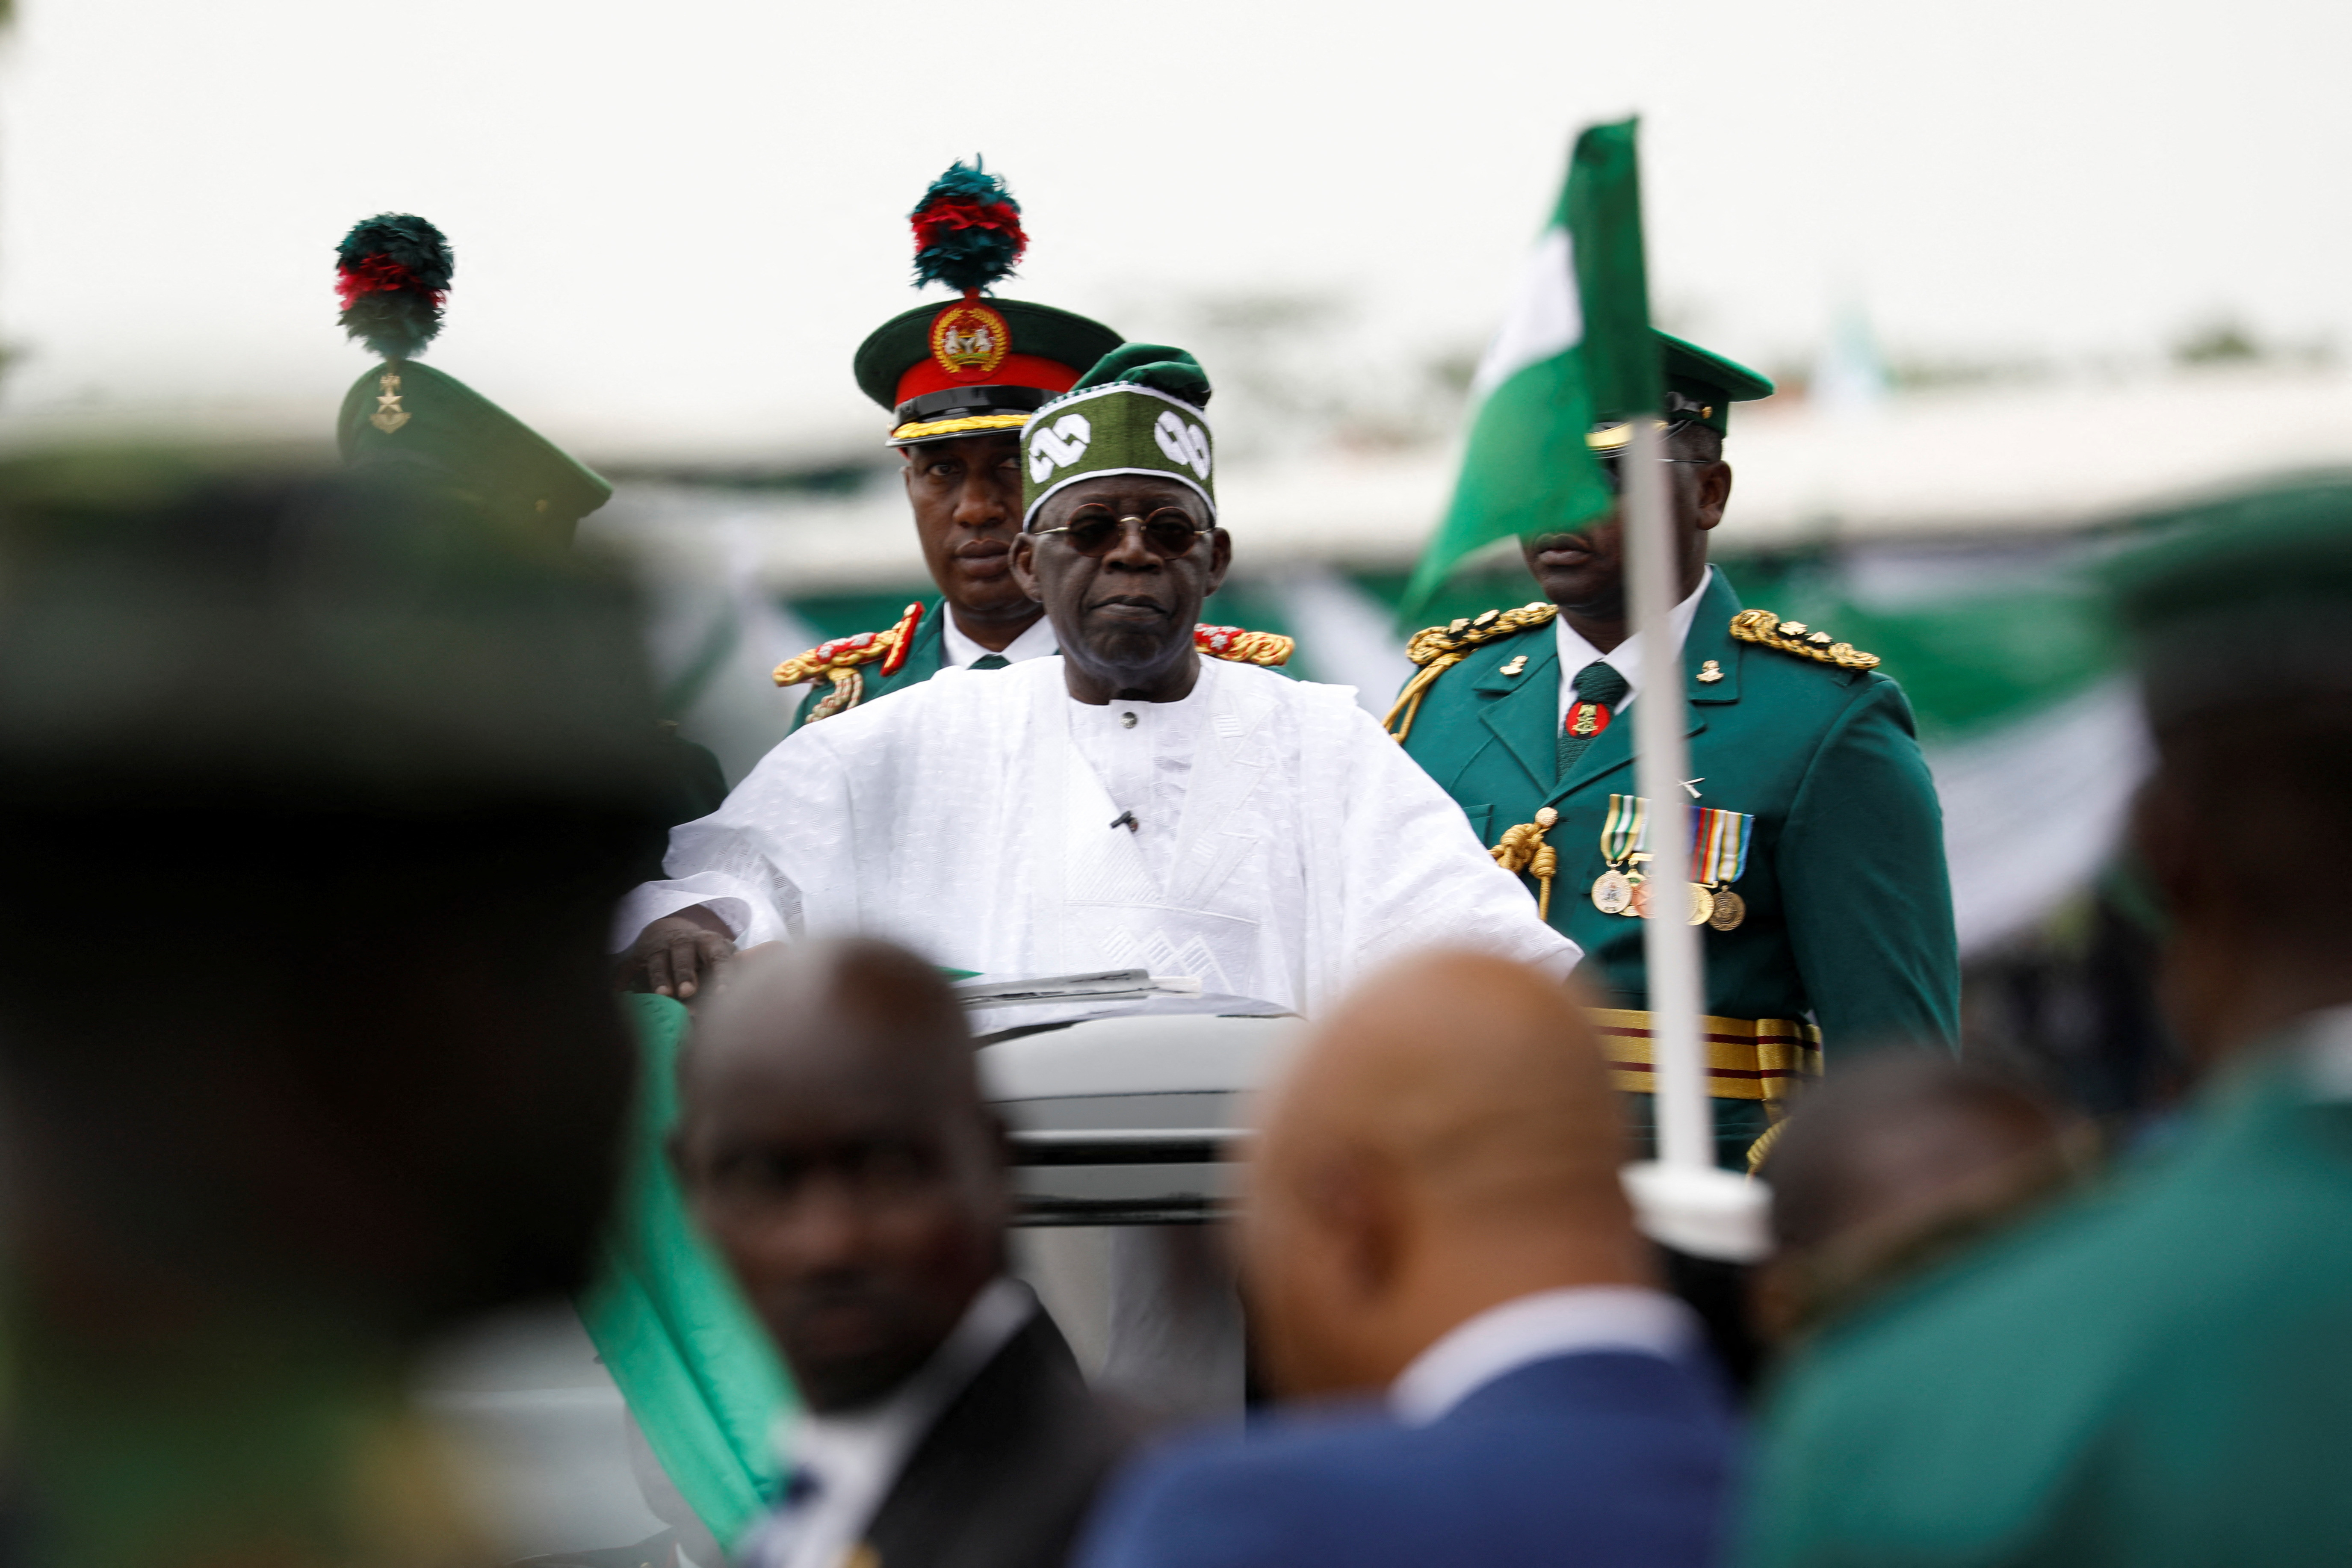 Nigeria's President Bola Tinubu looks on as he takes the traditional ride on top of a ceremonial vehicle after his swearing-in ceremony in Abuja